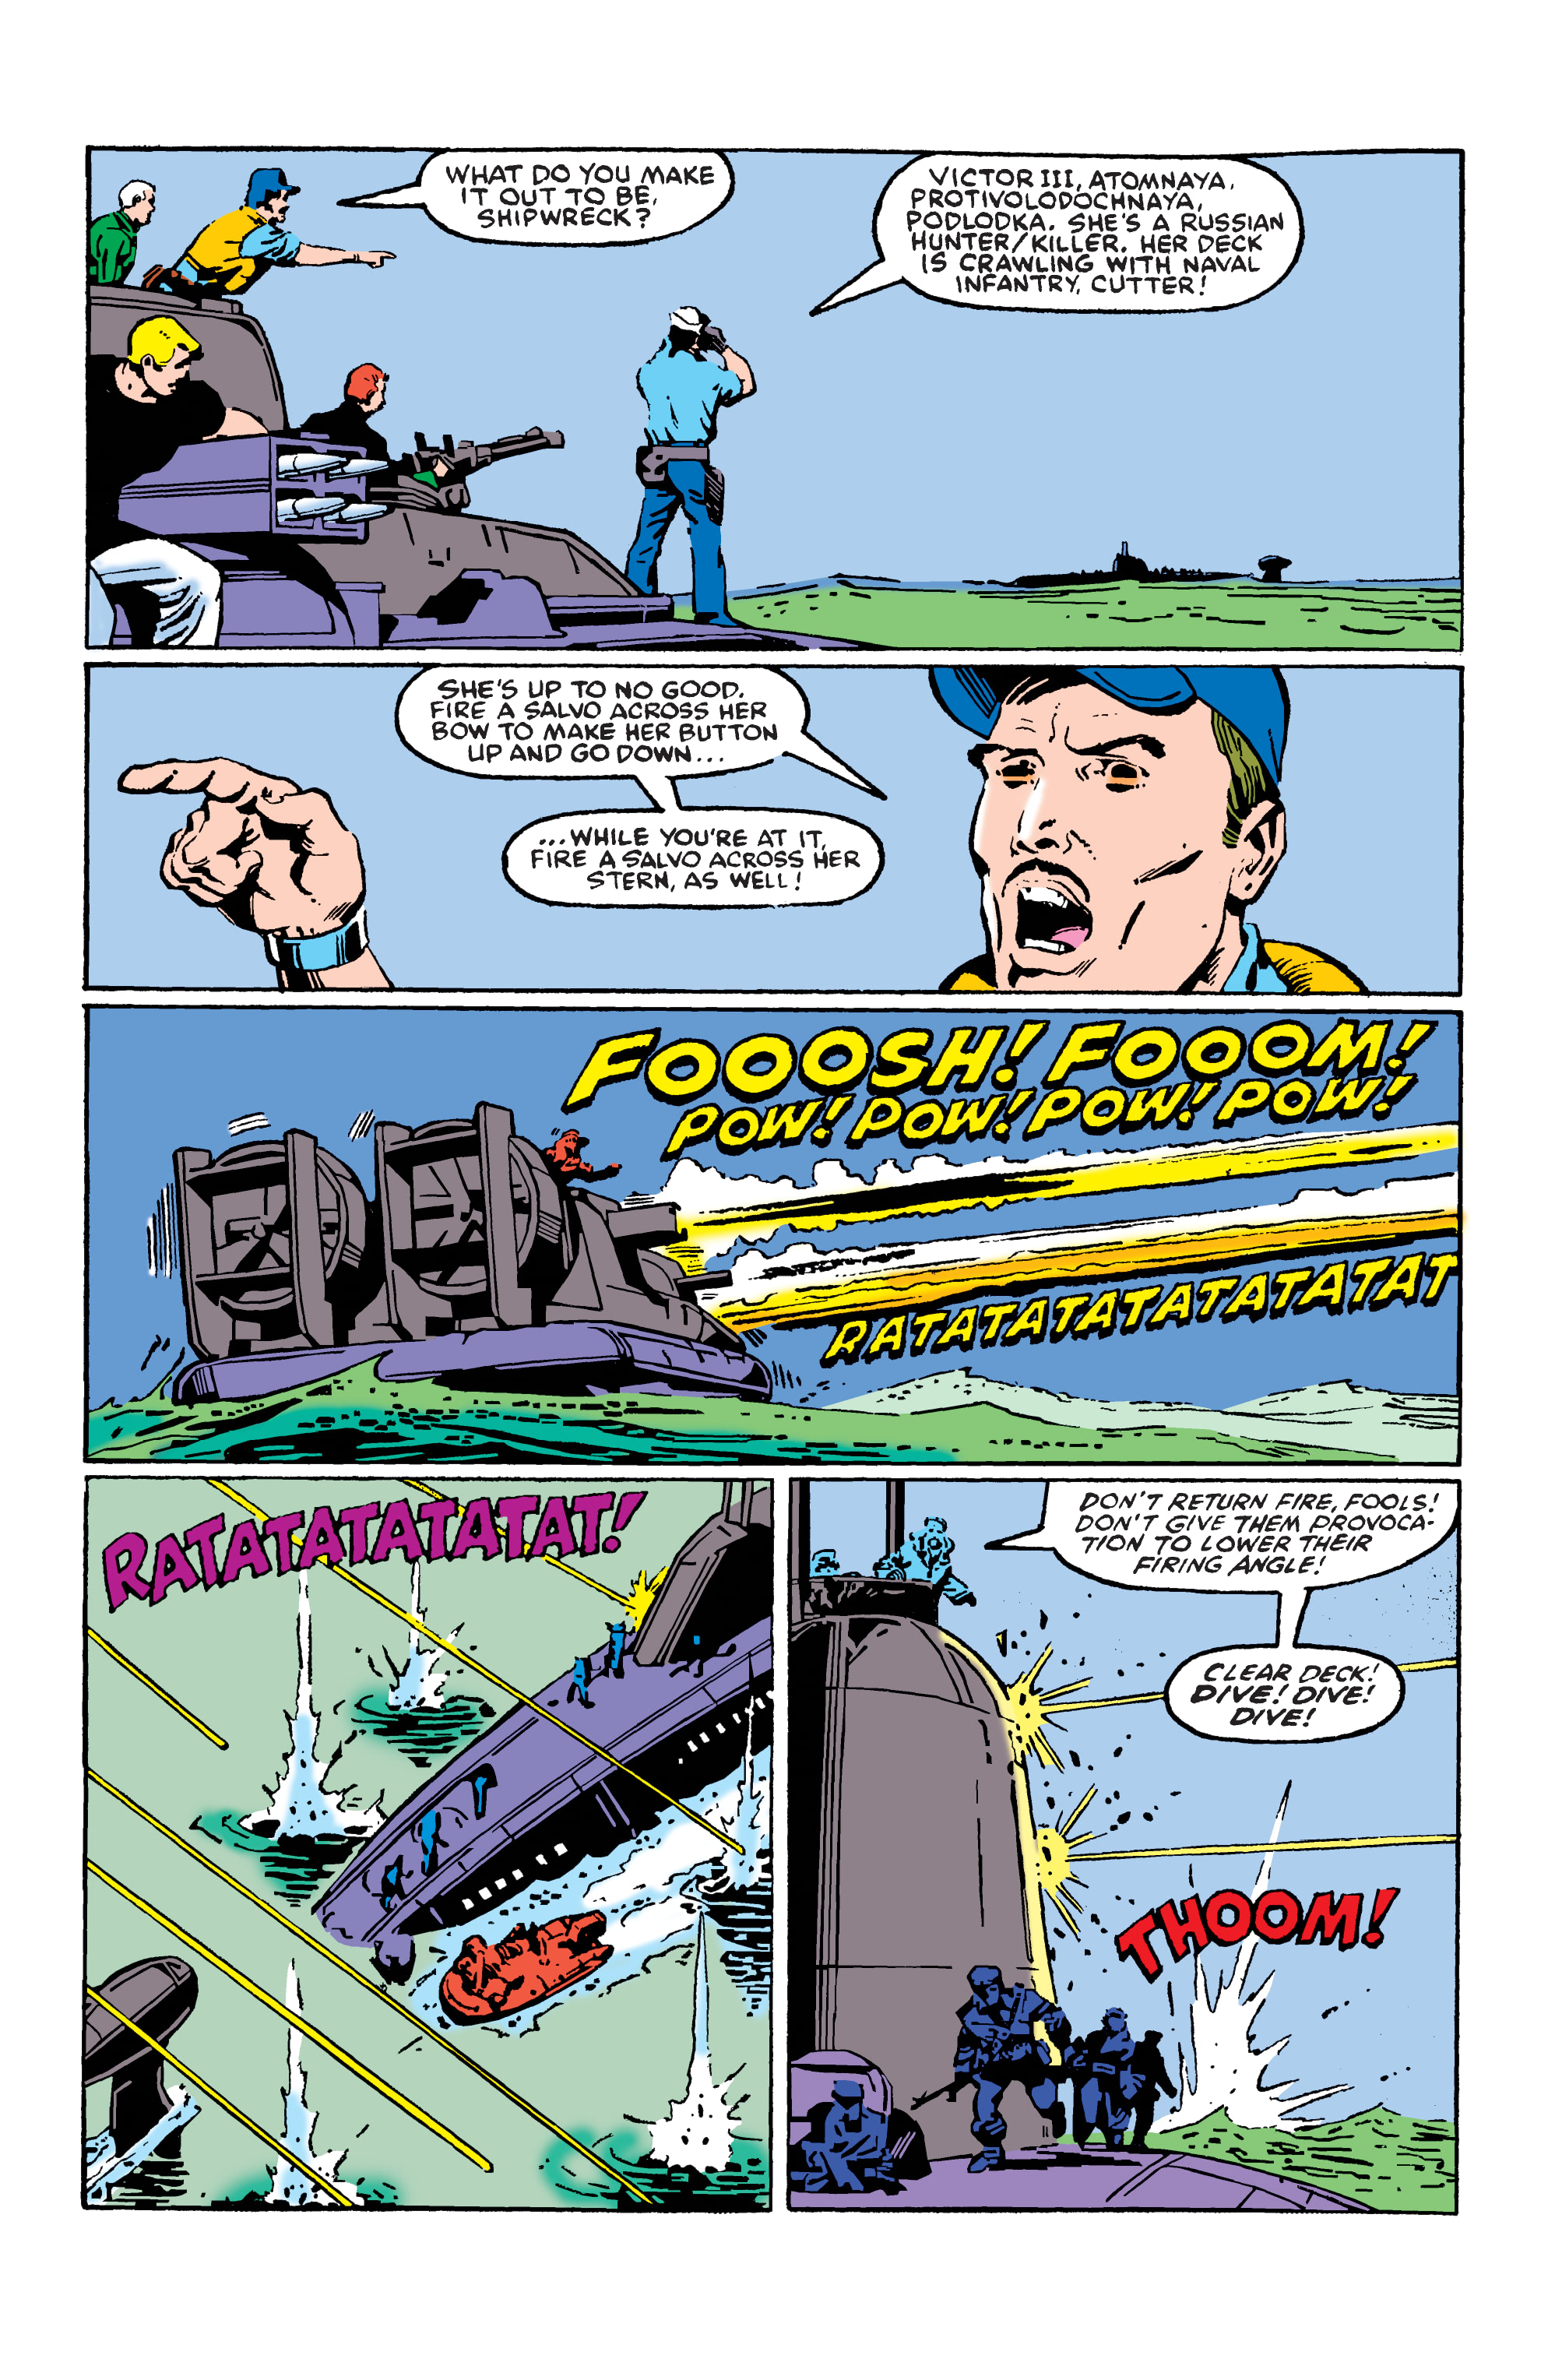 G.I. Joe: A Real American Hero: Yearbook (2021): Chapter 4 - Page 4